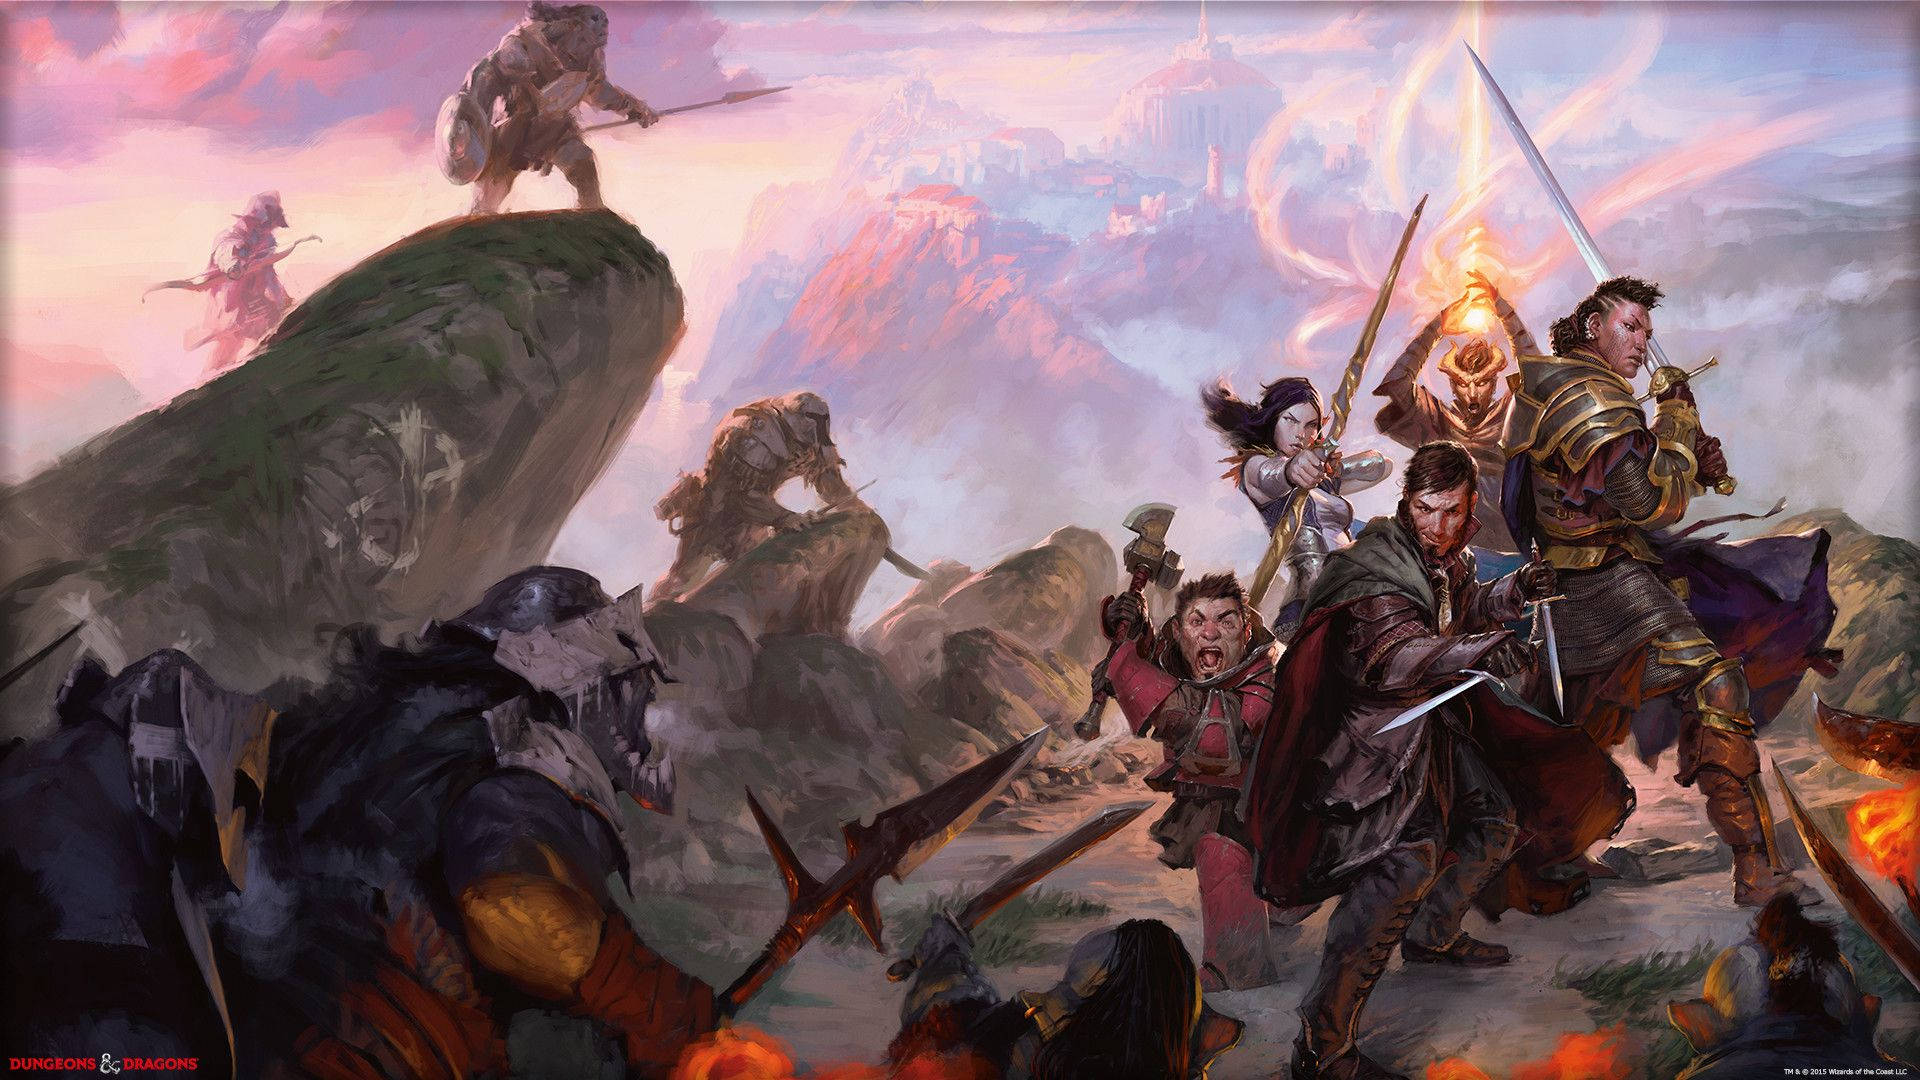 Two brave adventurers take on a fierce monster in the dangerous world of Dungeons and Dragons. Wallpaper